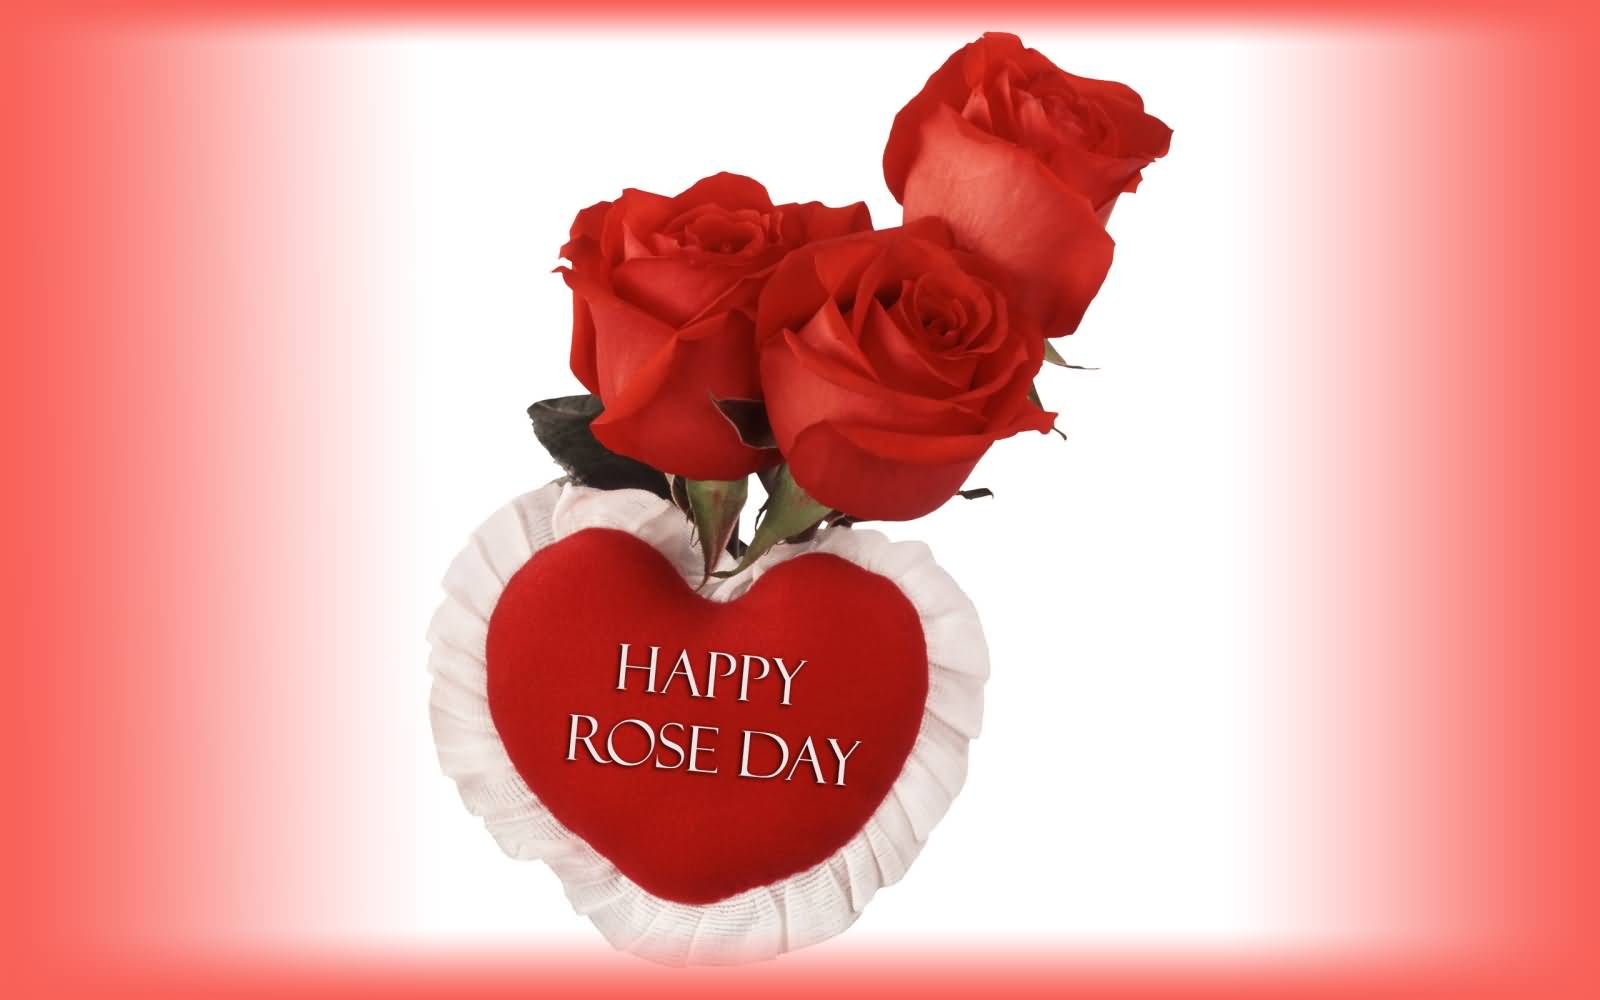 Happy Rose Day Rose Buds And Heart